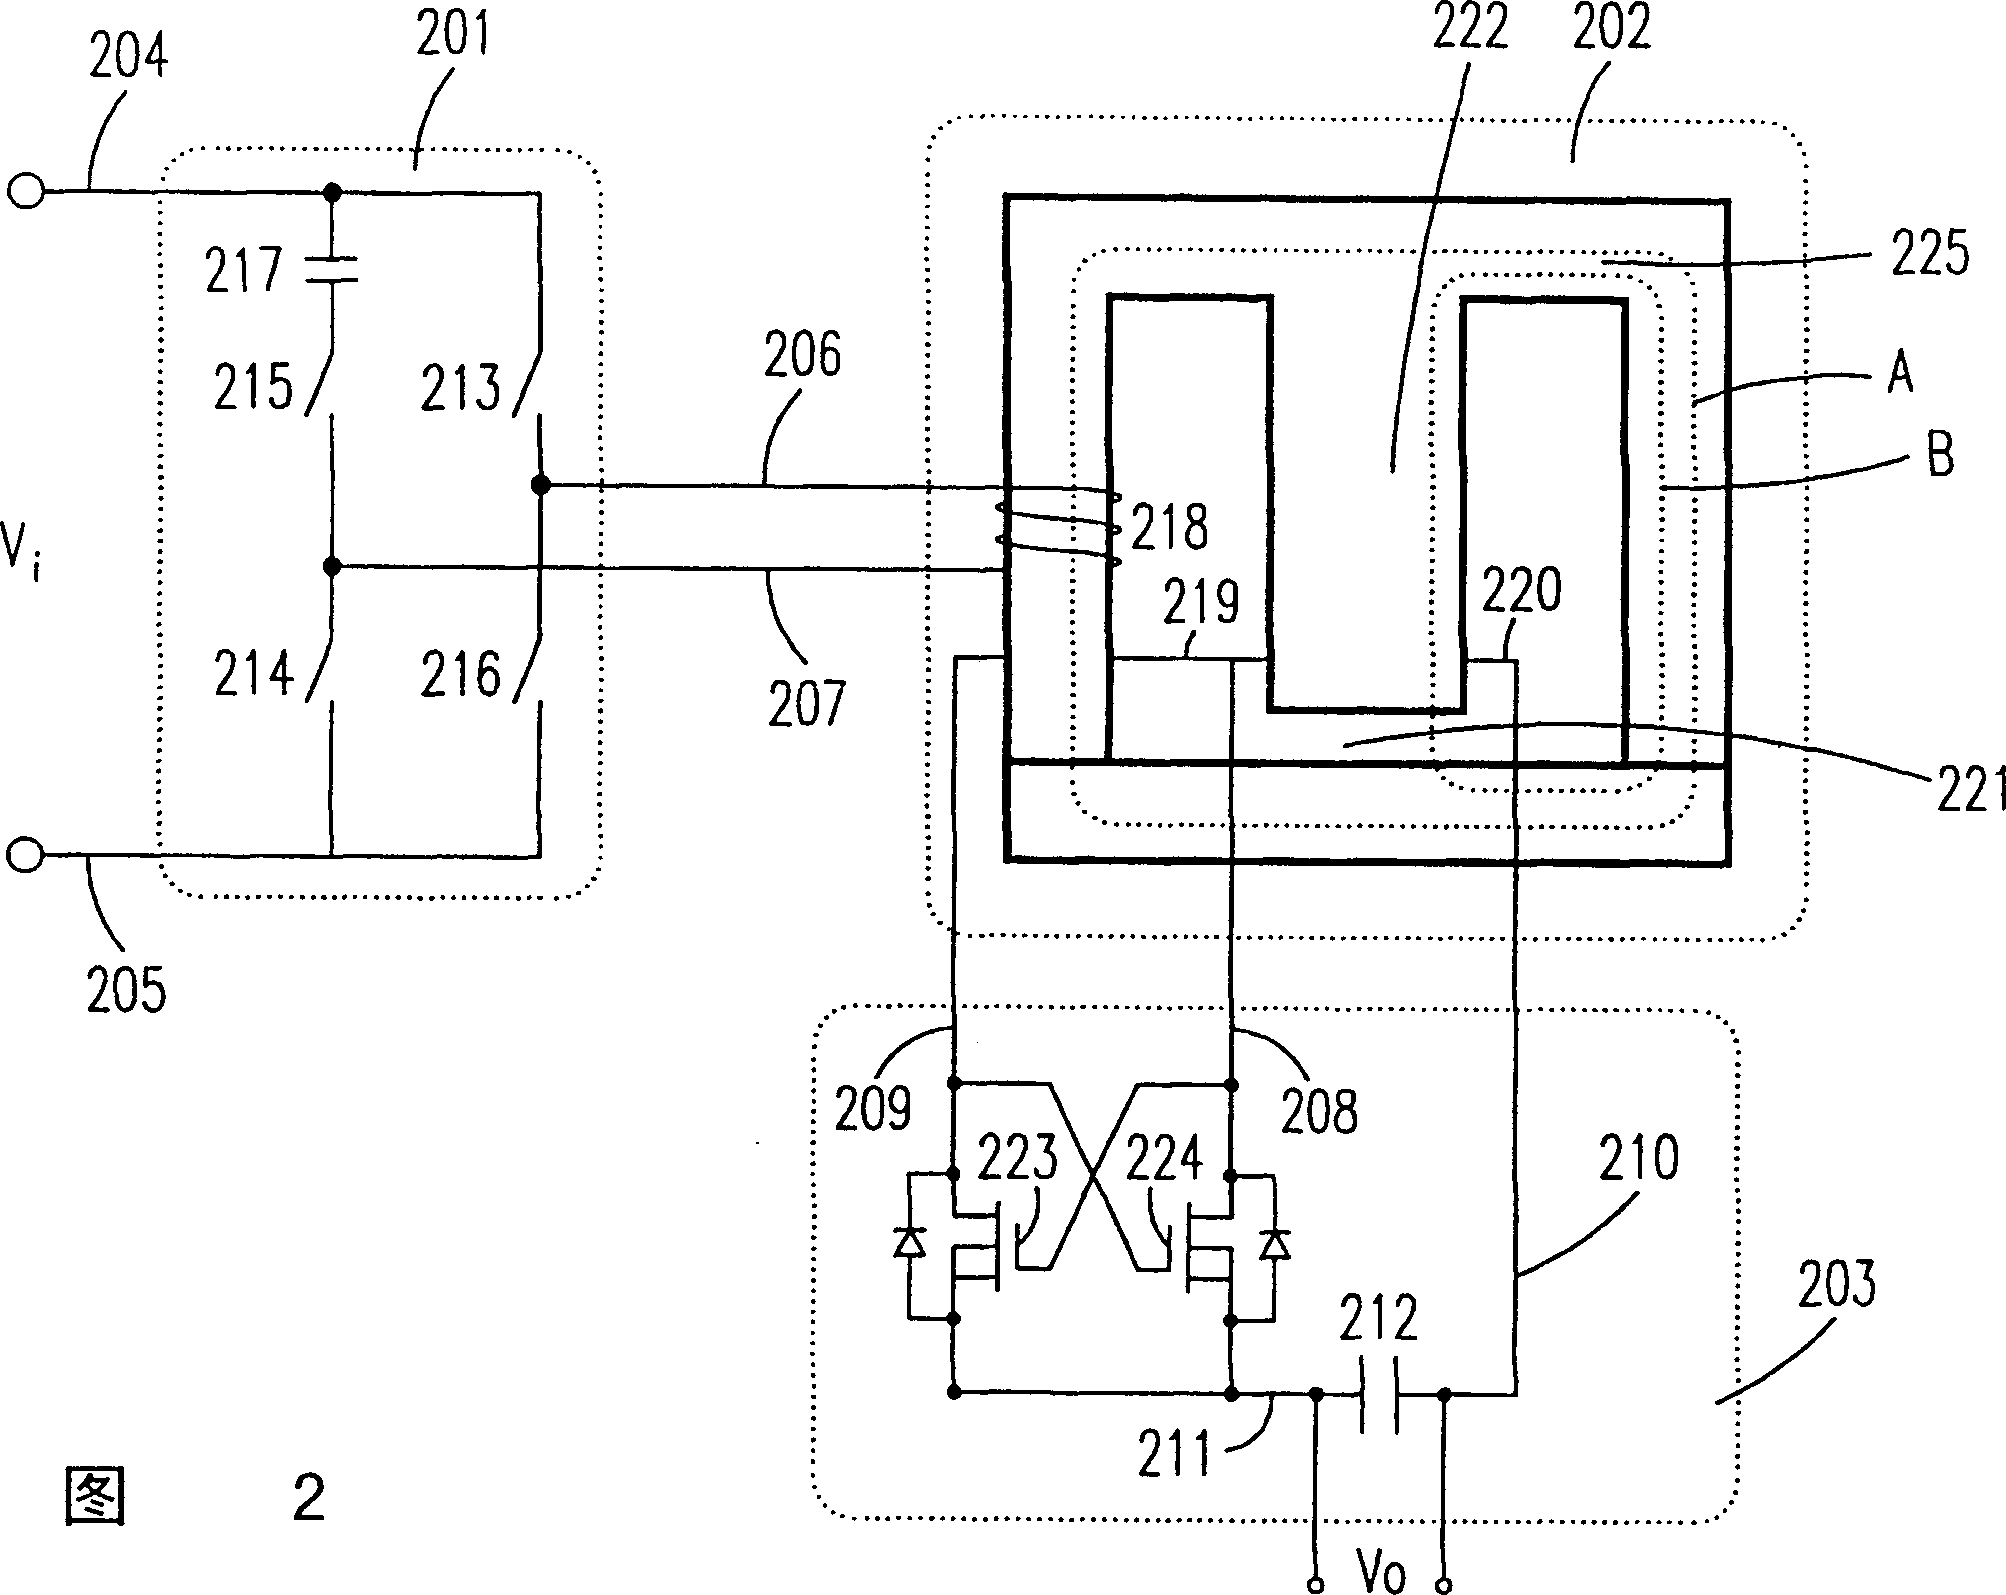 DC-DC converter having integrated magnetic cell and synchronous rectification